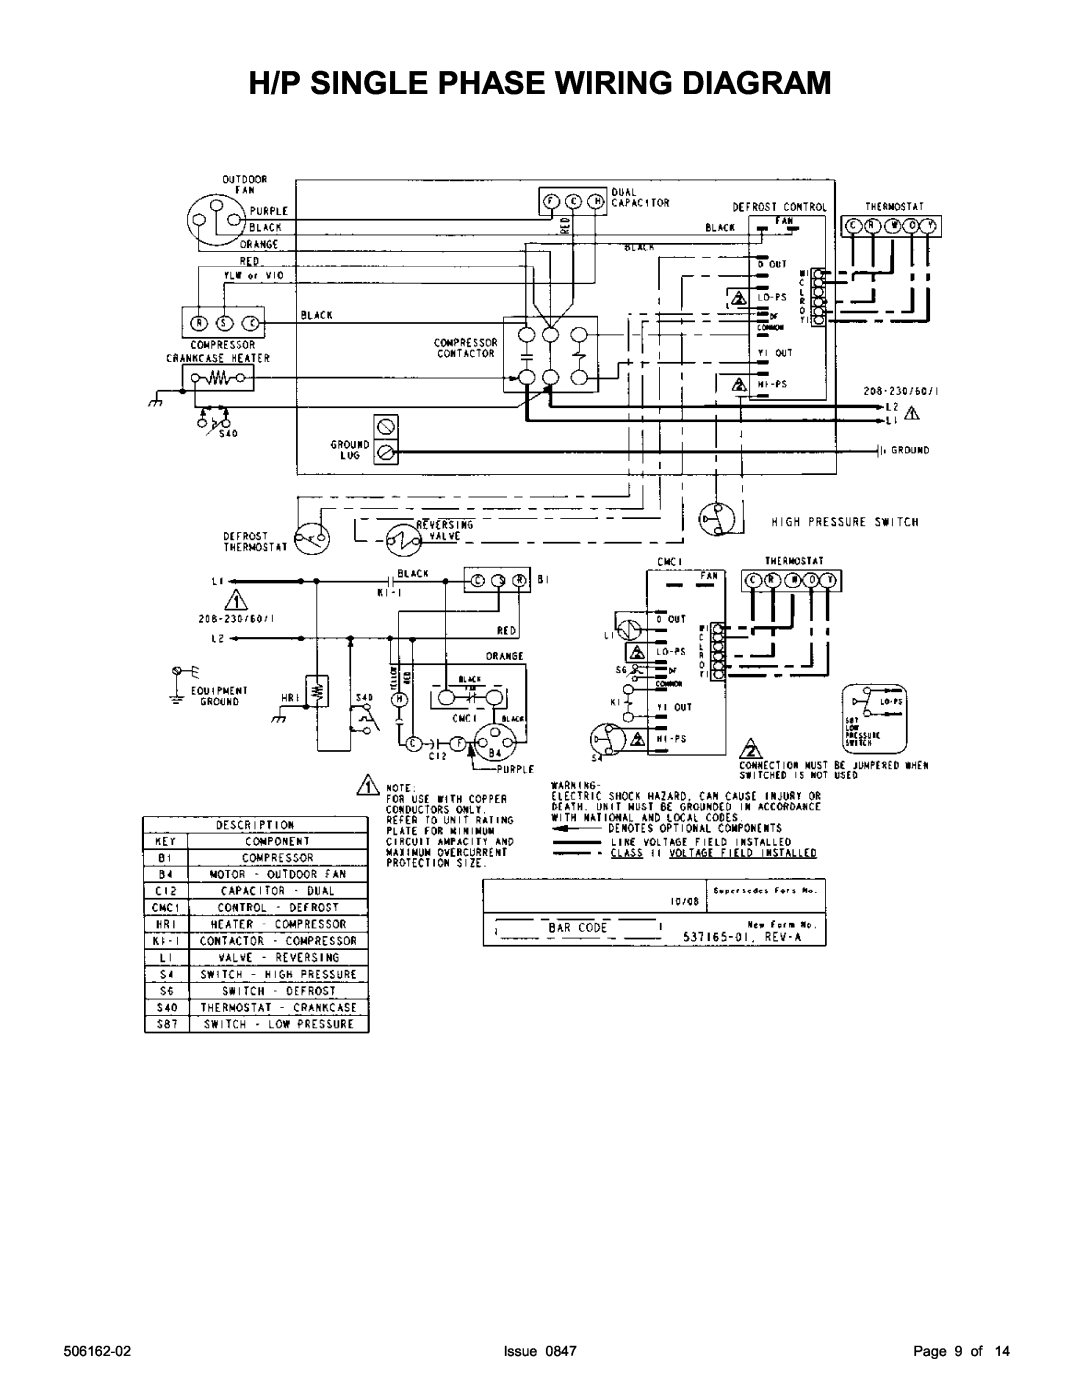 Ducane (HVAC) 2HP13/14 warranty H/P Single Phase Wiring Diagram, Issue, Page 9 of, 506162-02 